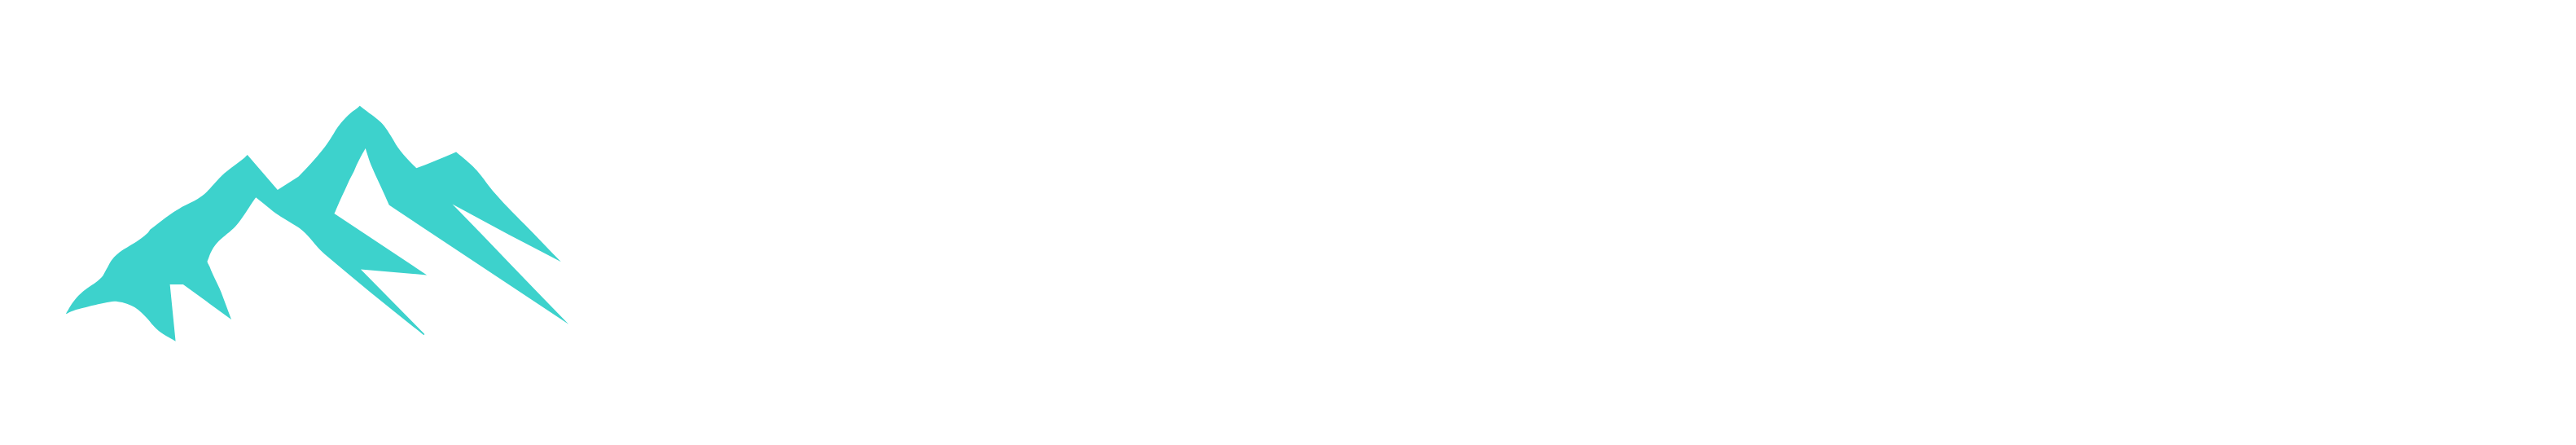 GOYJ, LLC logo with letters in white and three mountains to left in turquoise